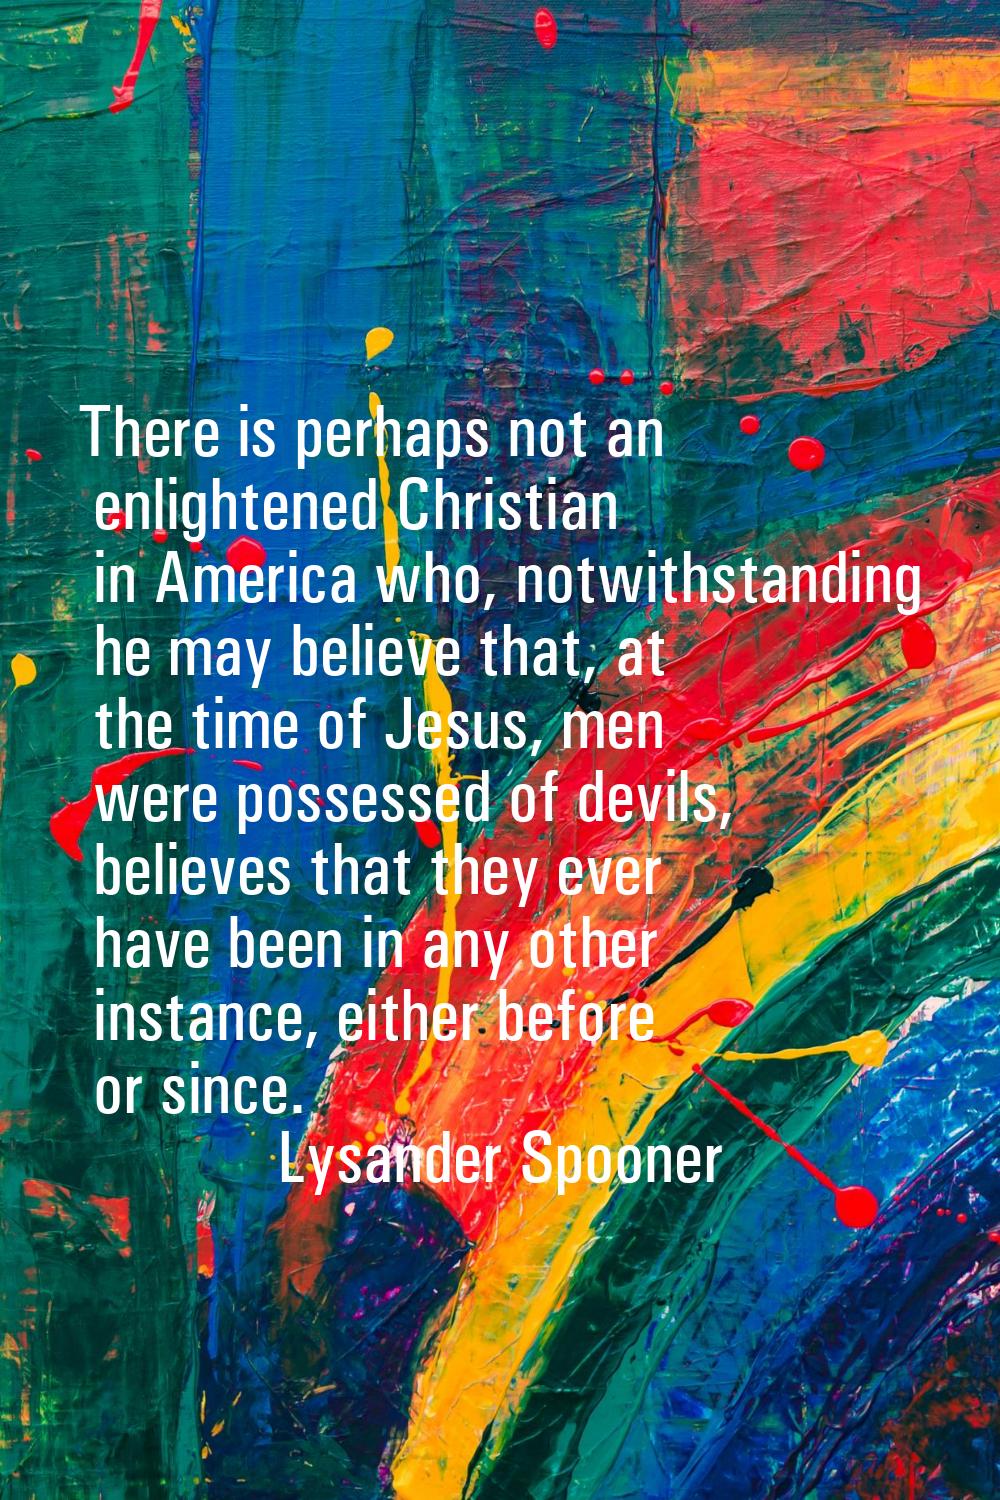 There is perhaps not an enlightened Christian in America who, notwithstanding he may believe that, 